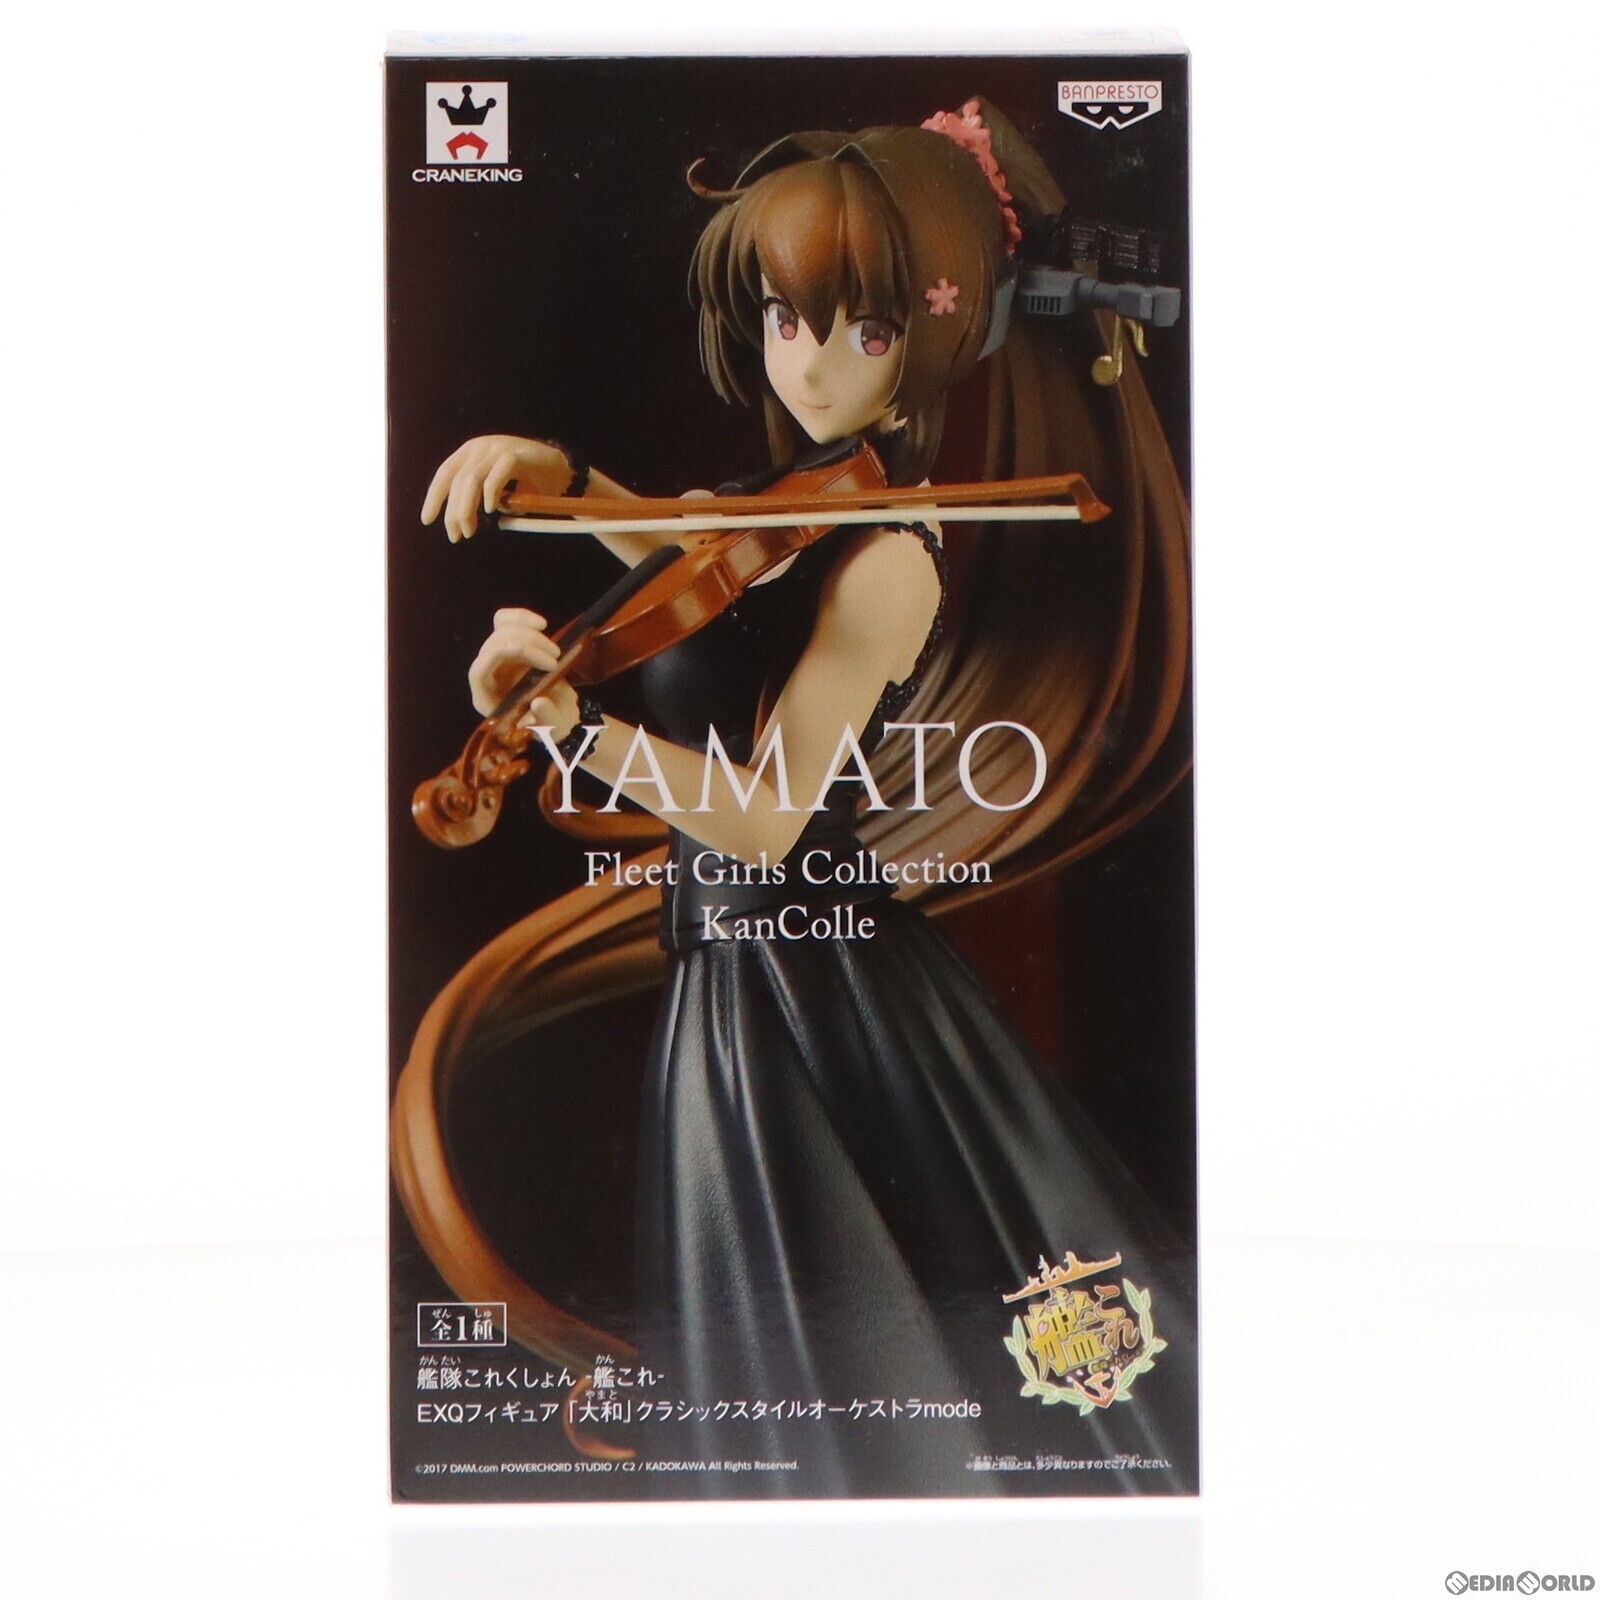 Fig Yamato Classicorchestra Mode Exq Figure Kantai Collection -Kancolle- Prize 3